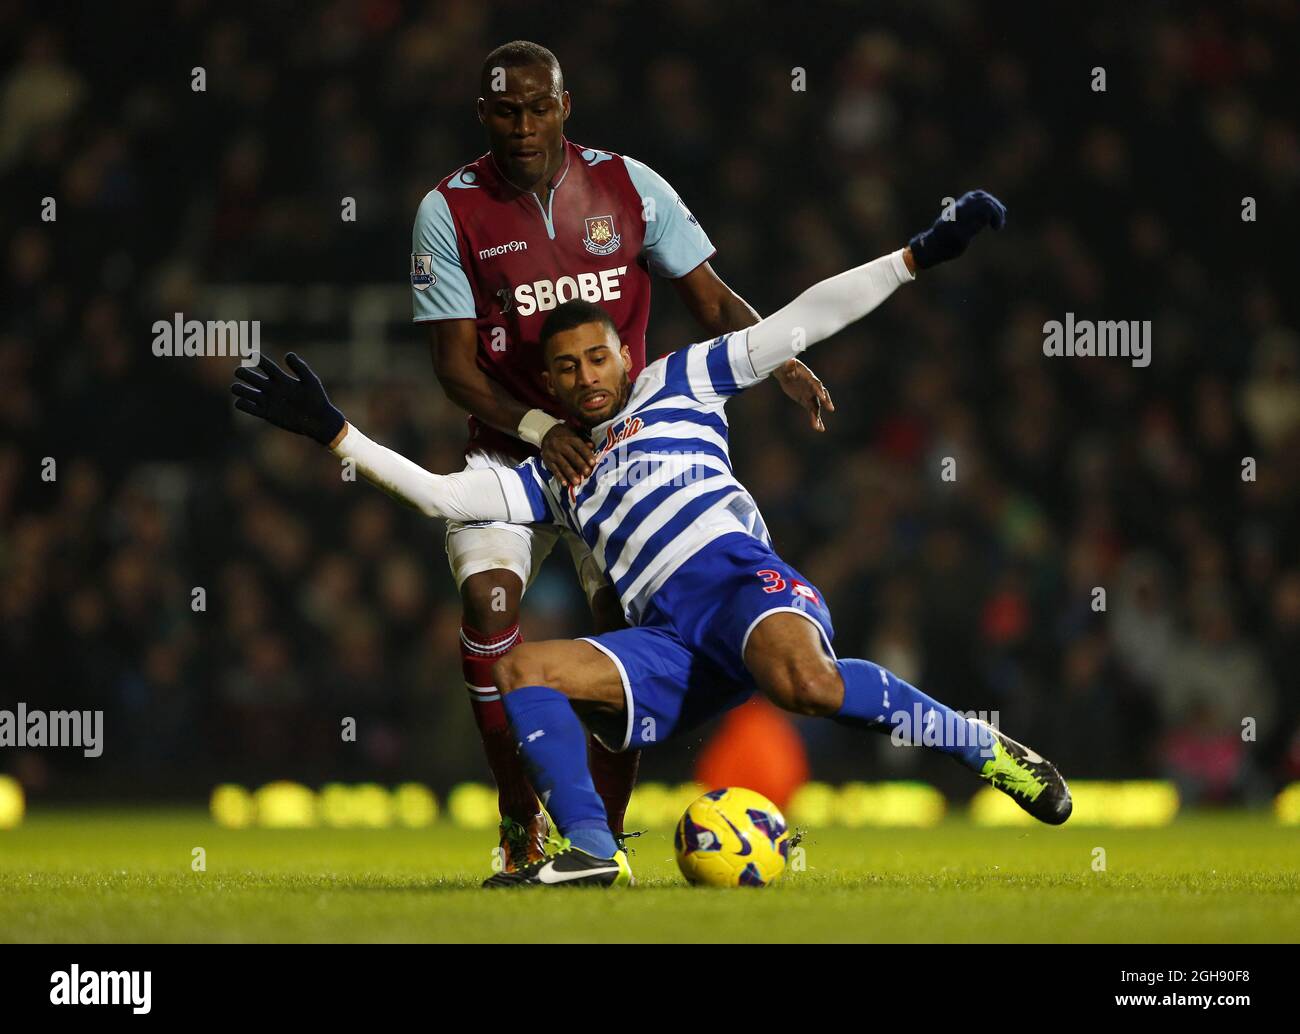 West Ham's Mohamed Diame tussles with QPR's Armand Traore during the Barclays Premier League soccer match between West Ham United and Queens Park Rangers at Upton Park in London, United Kingdom on January 19, 2013. Picture David Klein Stock Photo